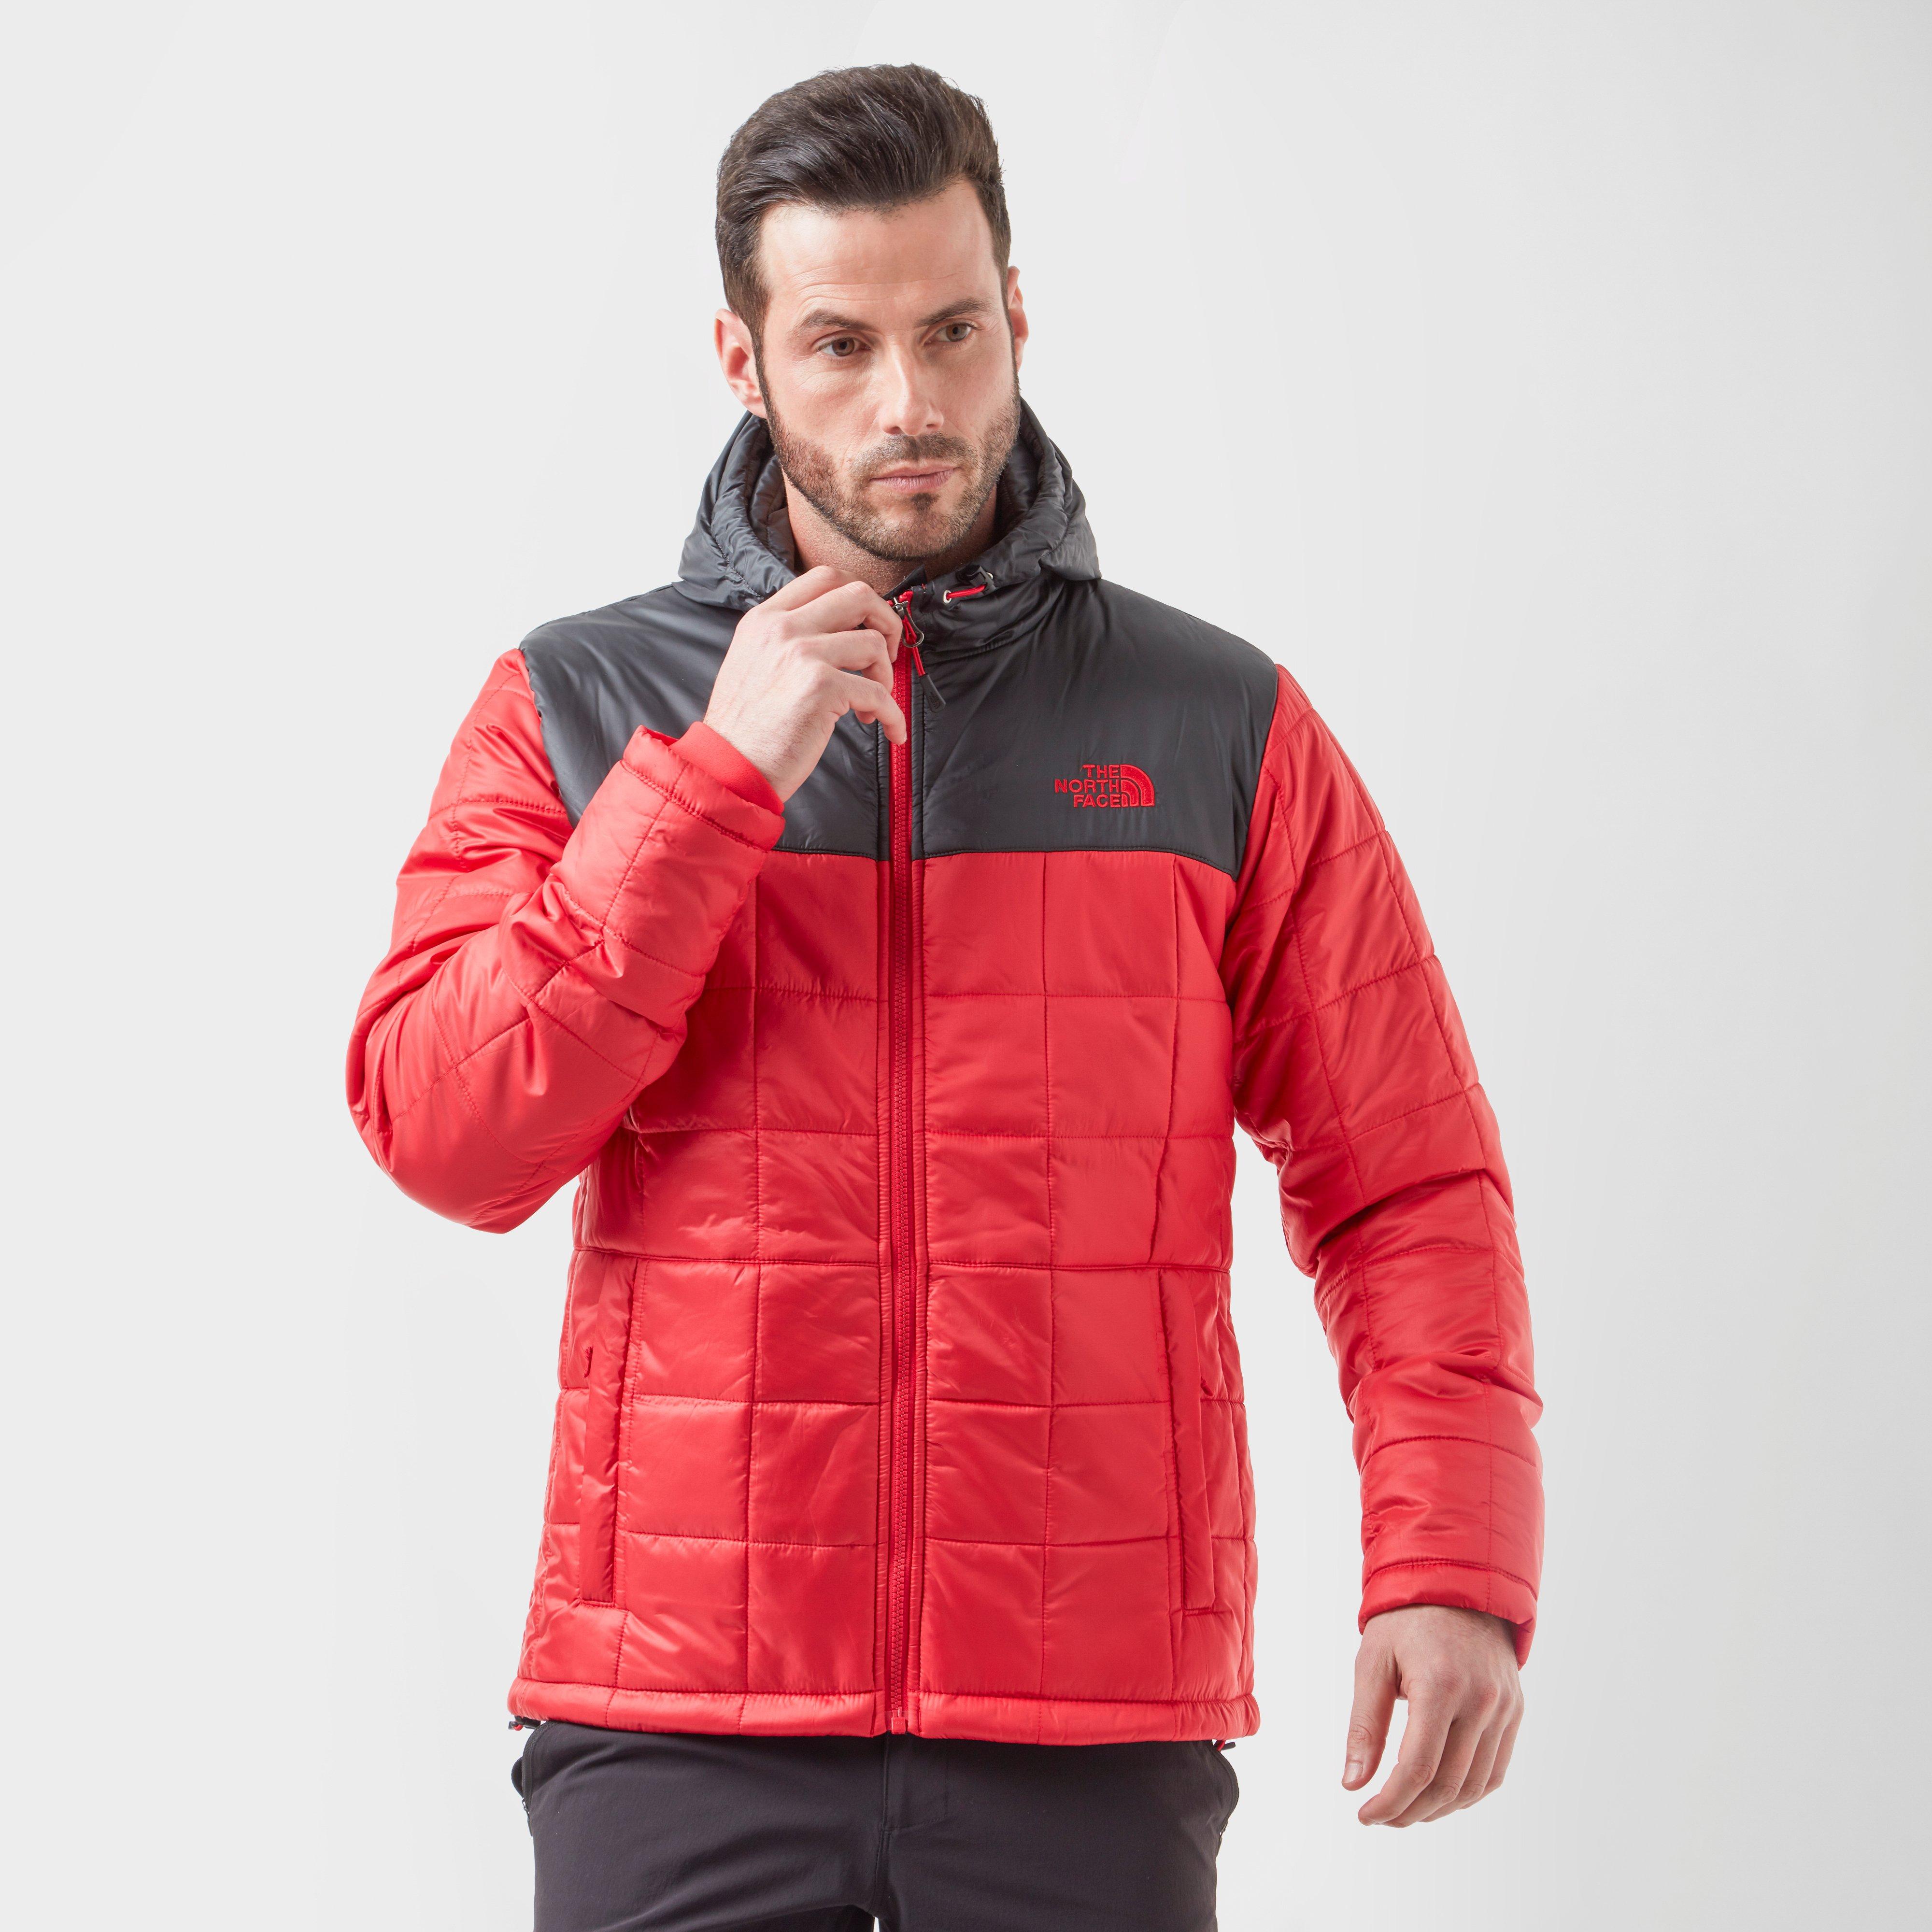 north face exhale jacket review